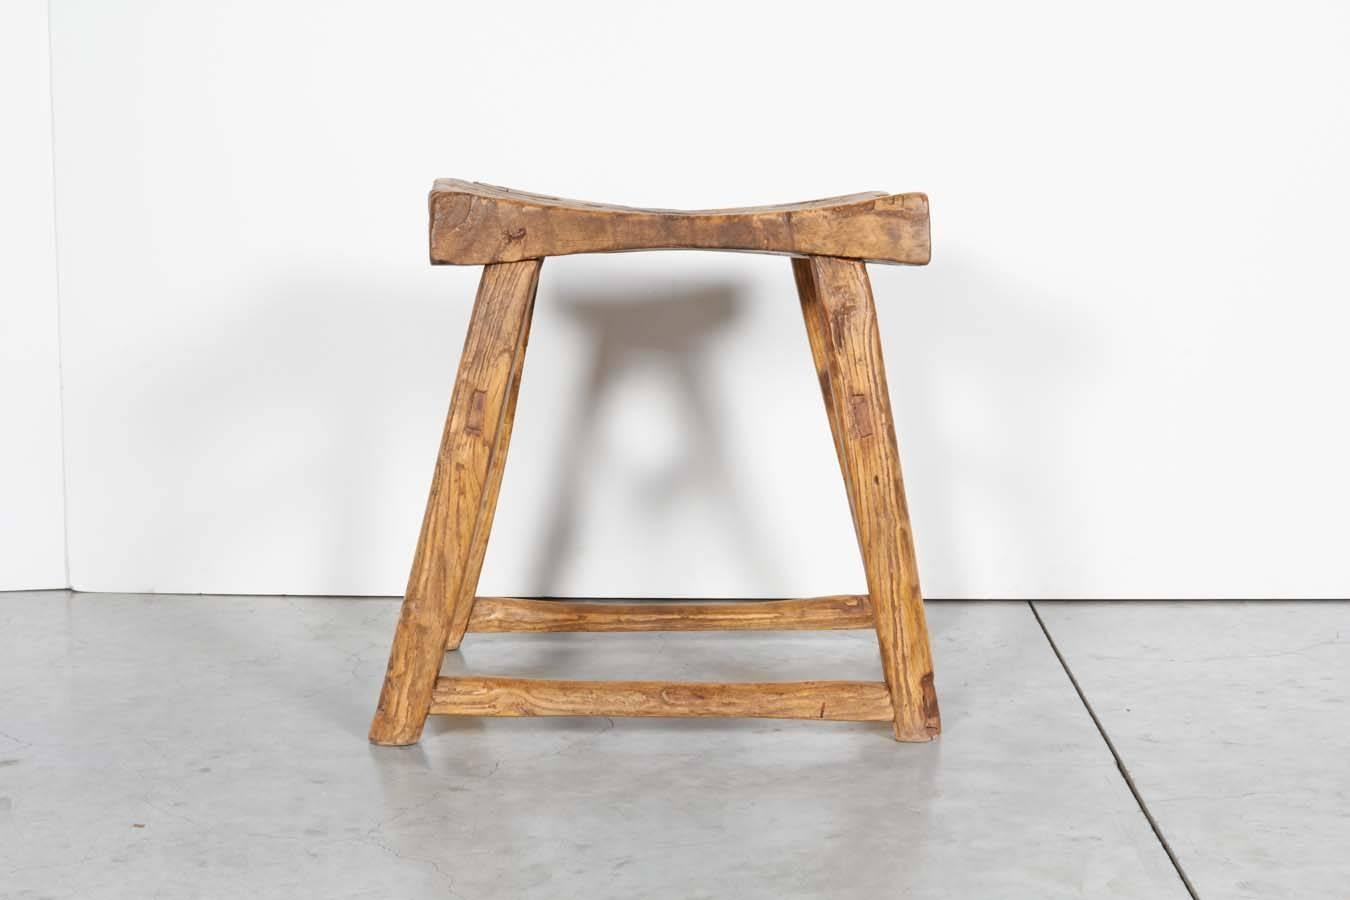 A beautifully worn, textured and patinated antique Chinese elm stool from Shanxi Province.
A striking design statement and a piece of history.
S440.